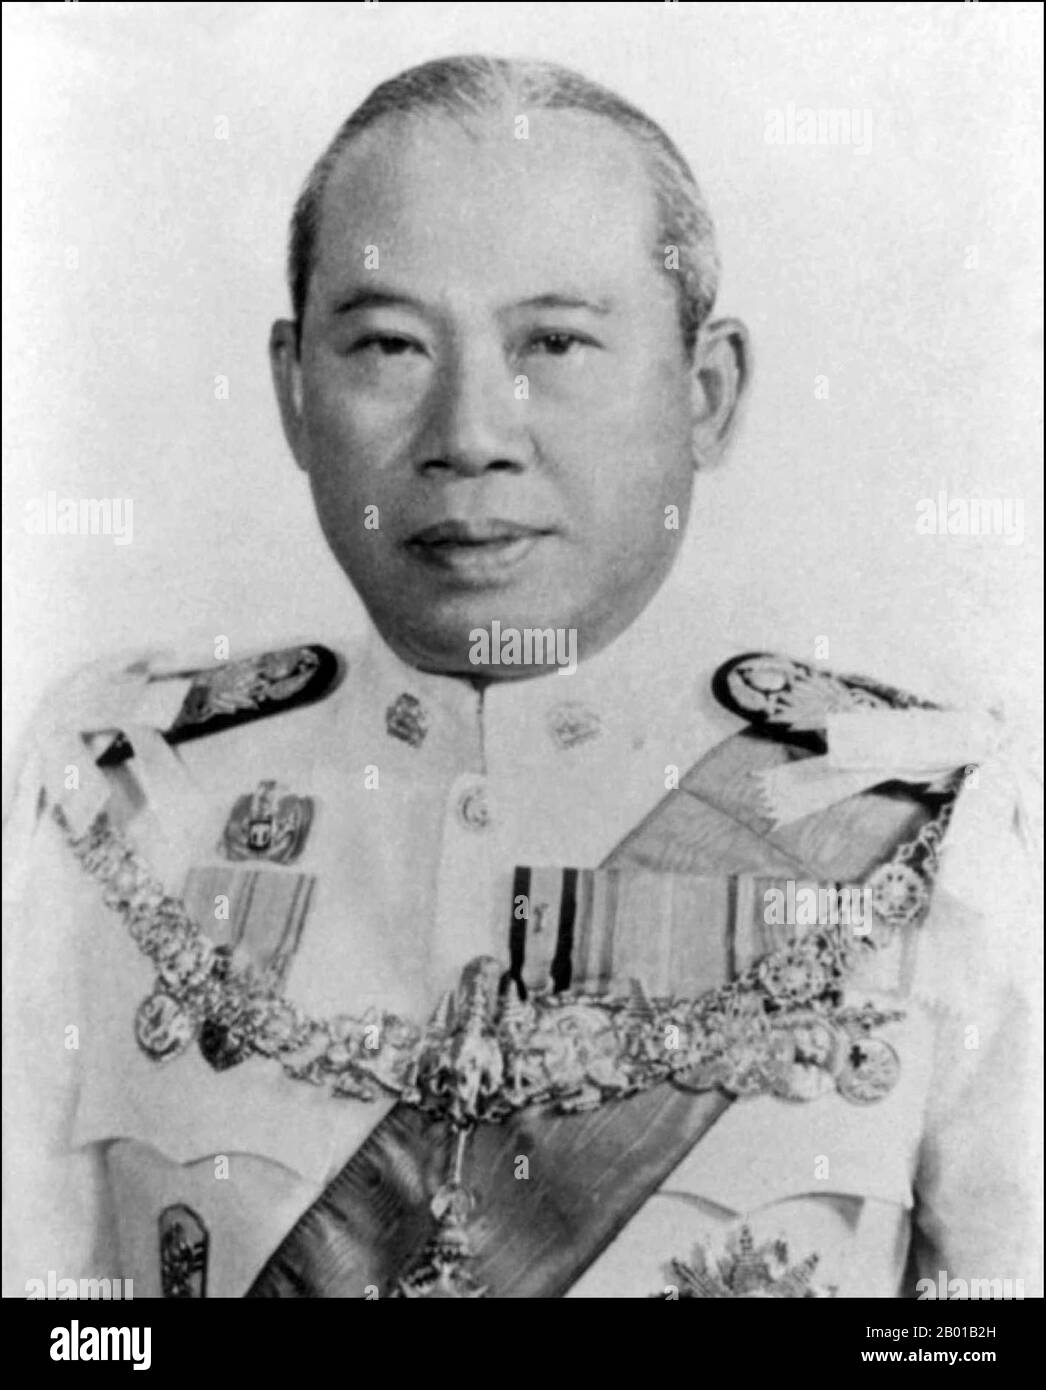 Field Marshal Thanom Kittikachorn (August 11, 1911 - June 16, 2004) was a military dictator of Thailand. A staunch anti-Communist, Thanom oversaw a decade of military rule in Thailand from 1963 to 1973, until public protests which exploded into violence forced him to step down. His return from exile in 1976 sparked protests which led to a massacre of demonstrators, followed by a military coup.  In October 1976, Thanom returned to Thailand as a novice monk at Wat Bowonniwet. His return triggered student protests which took place on the campus of Thammasat University. The far right, aided by gov Stock Photo